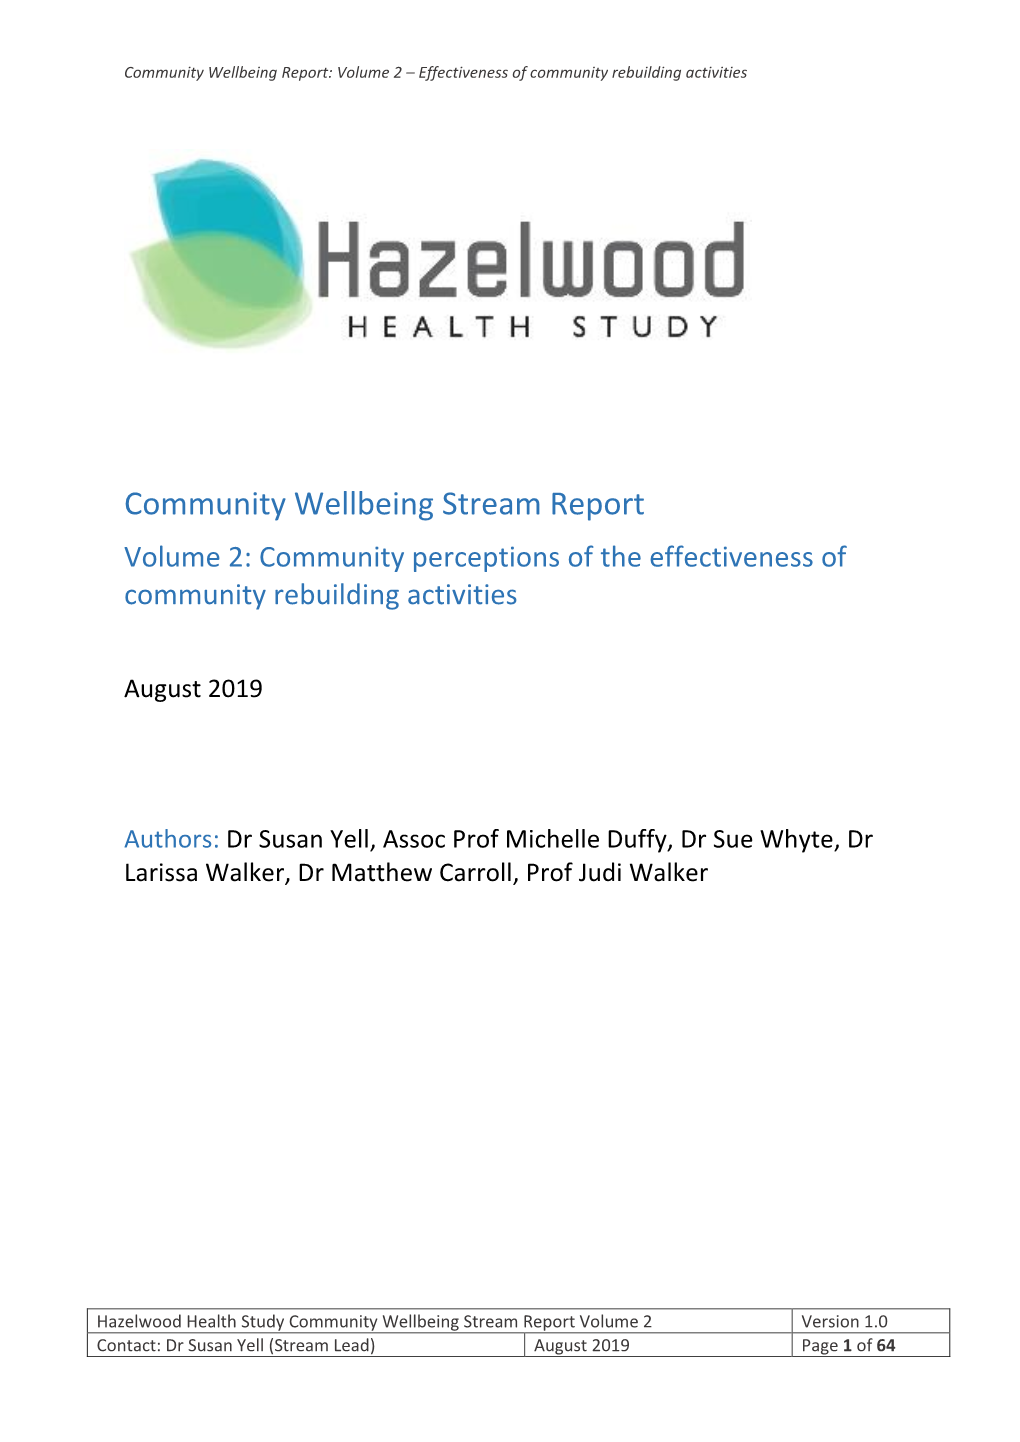 Community Wellbeing Stream Report Volume 2: Community Perceptions of the Effectiveness of Community Rebuilding Activities